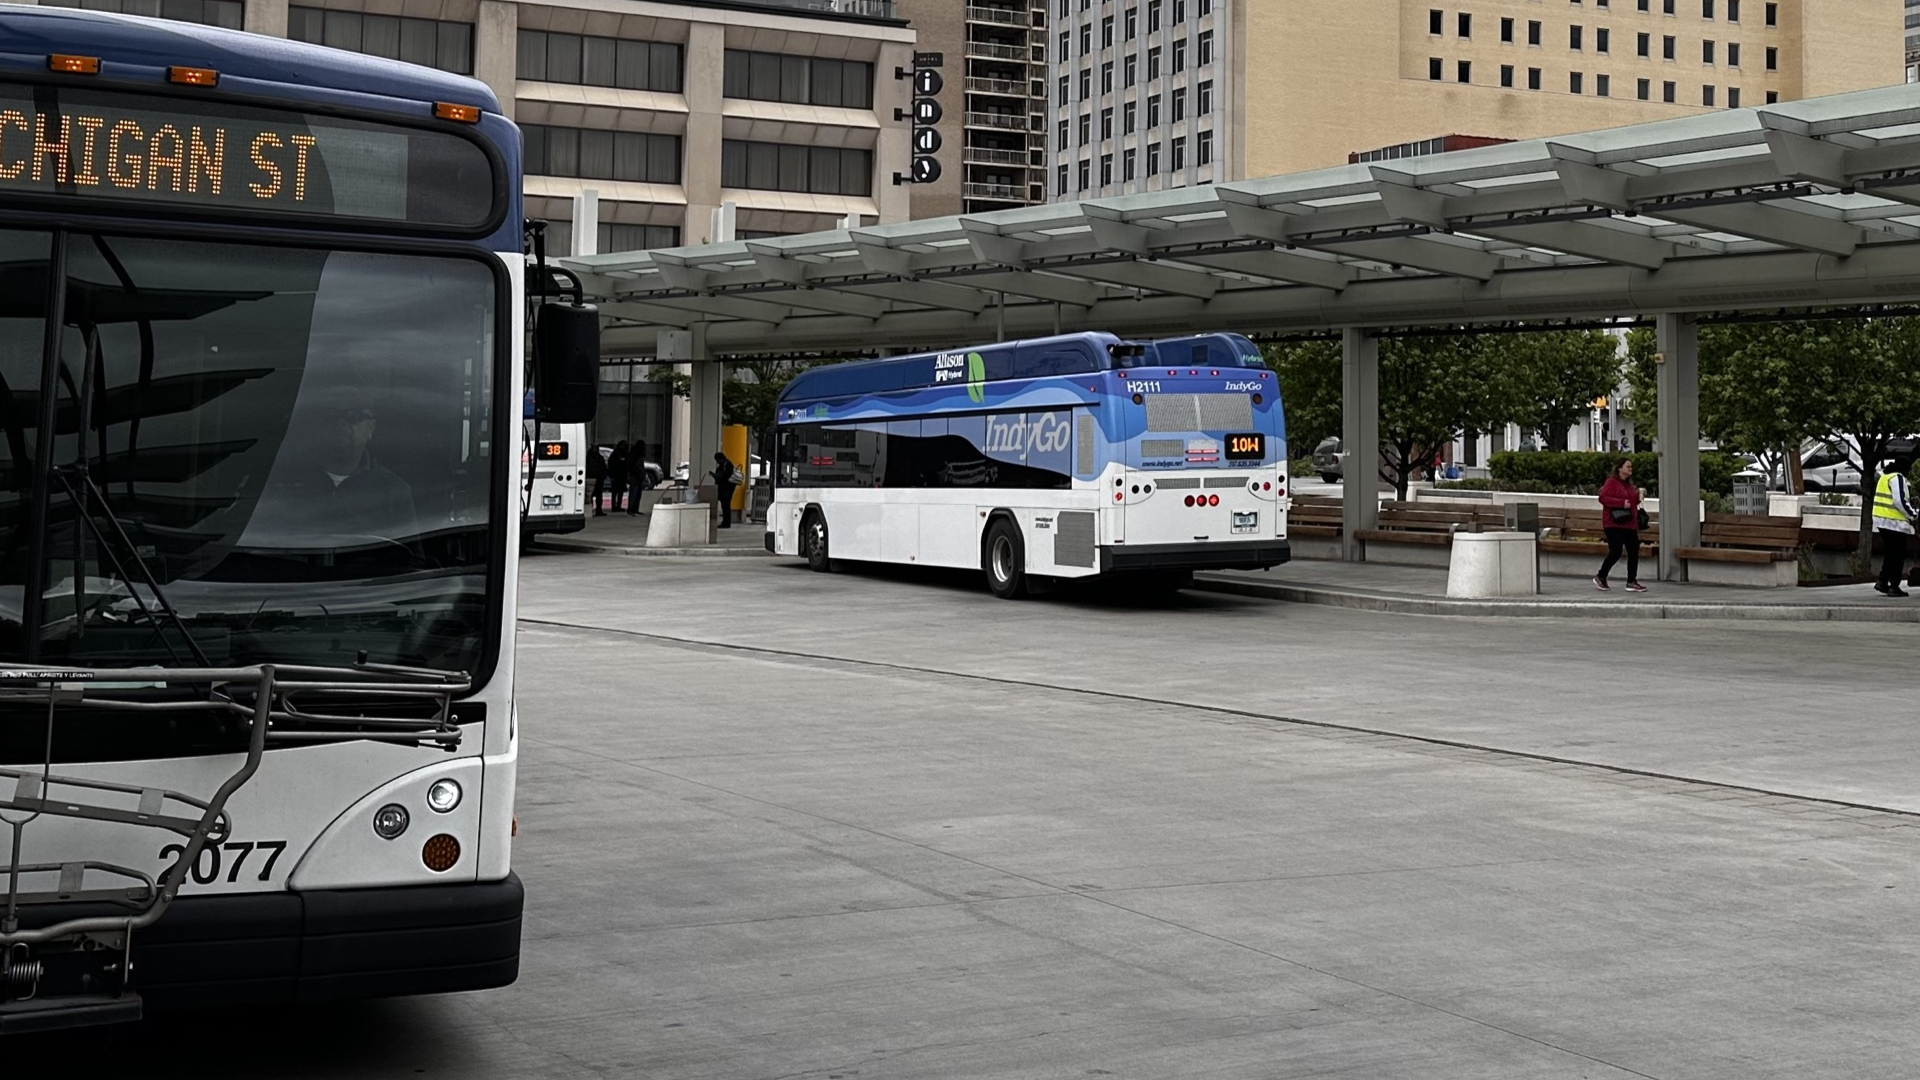 IndyGo will use these funds for "critical infrastructure and safety improvements" along the Historic East section of the Blue Line bus rapid transit corridor.